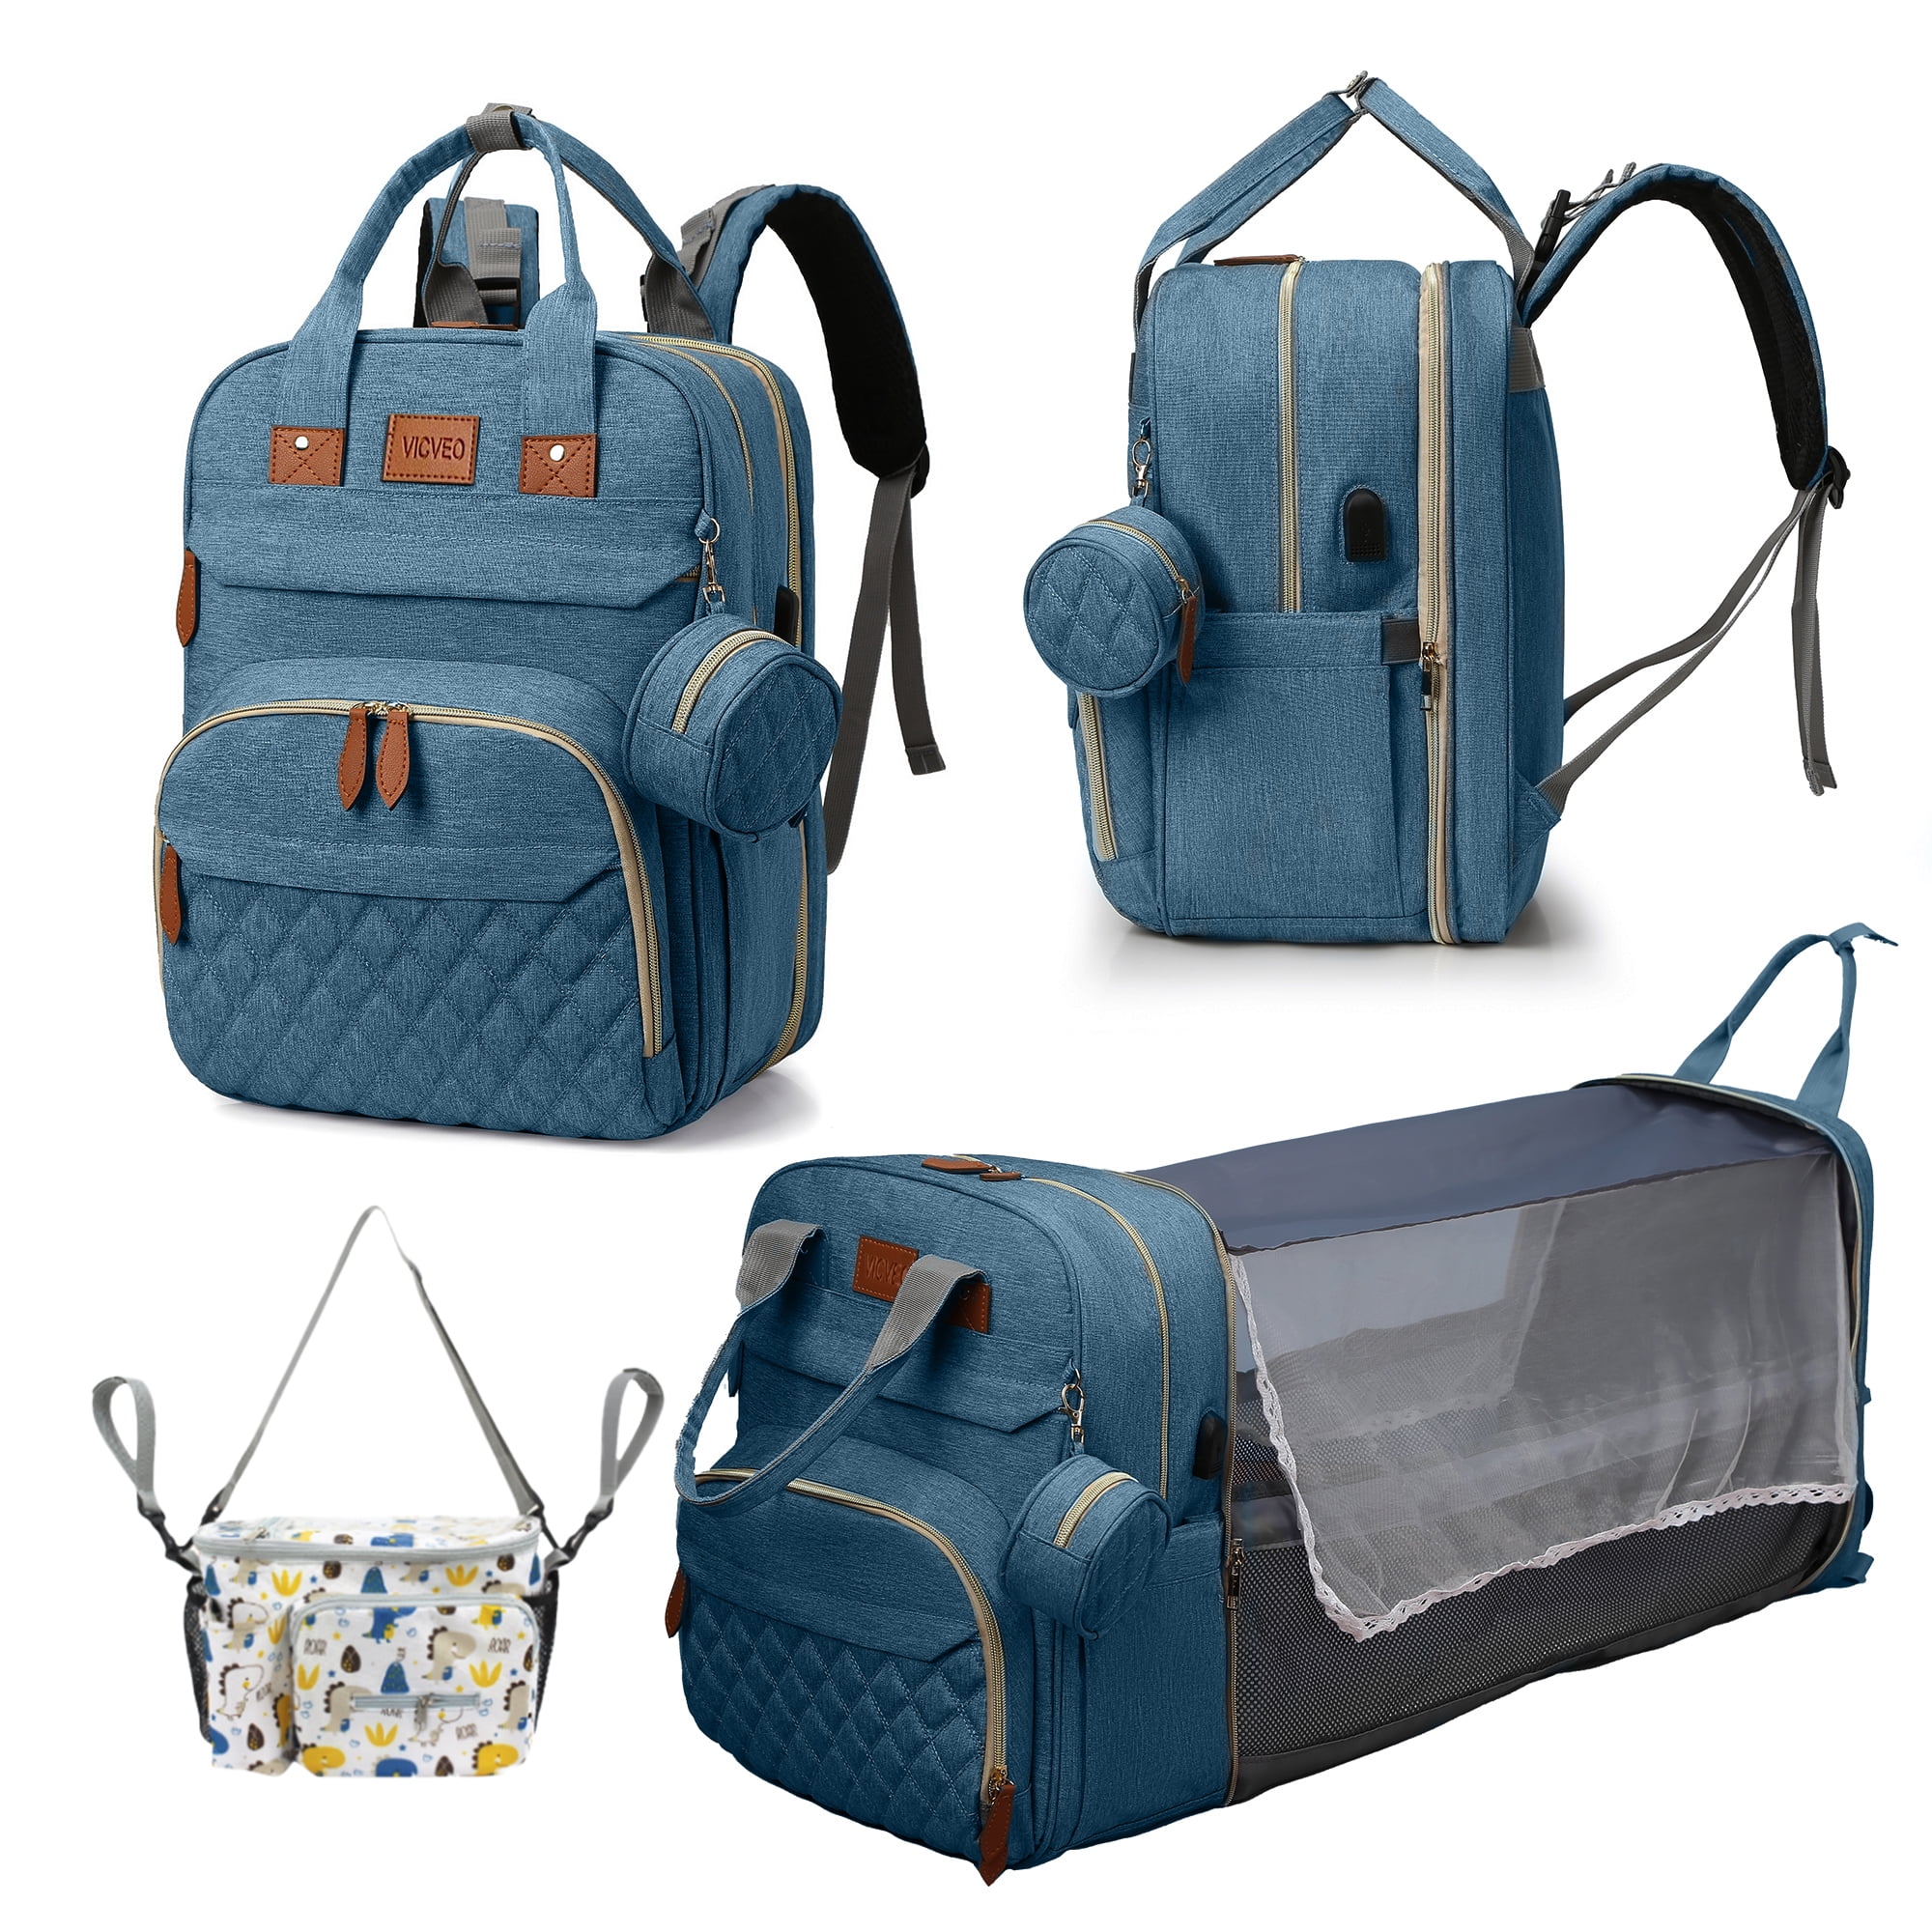 Diaper Bag with Changing Station, Large Travel Diaper Bag Backpack